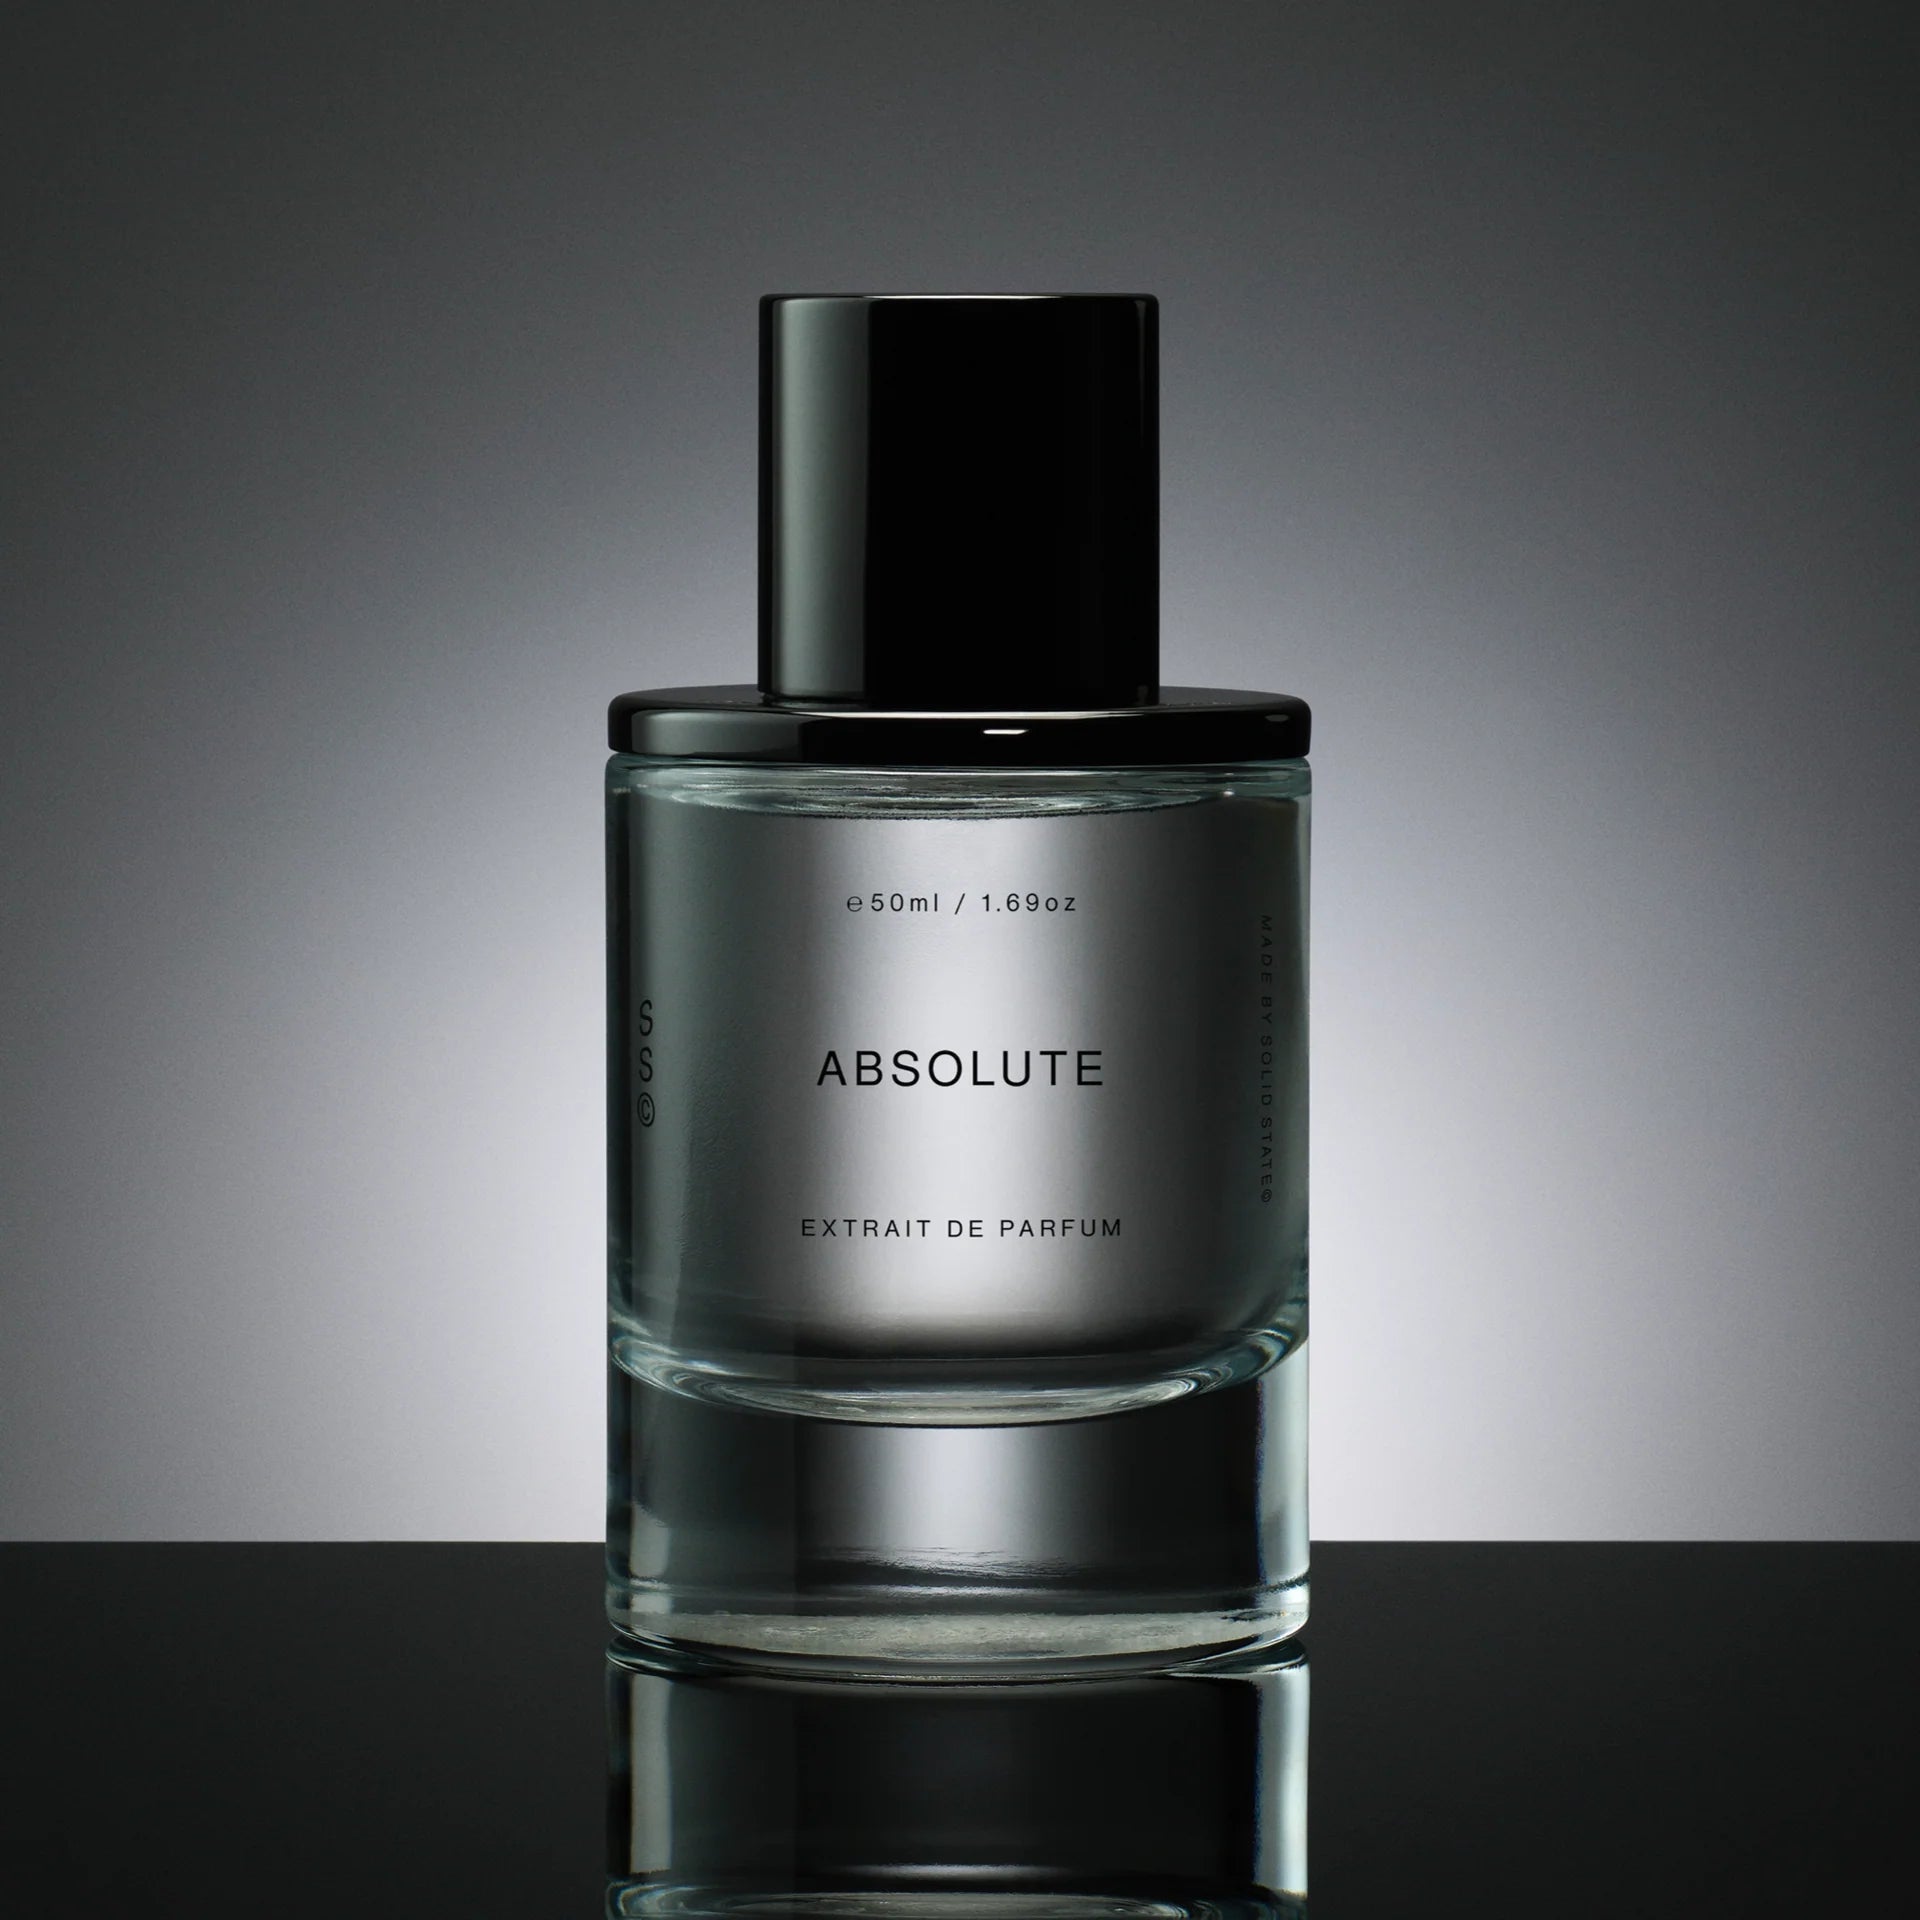 Fragrance Absolute. Pineapple, Musk, Blackcurrant.